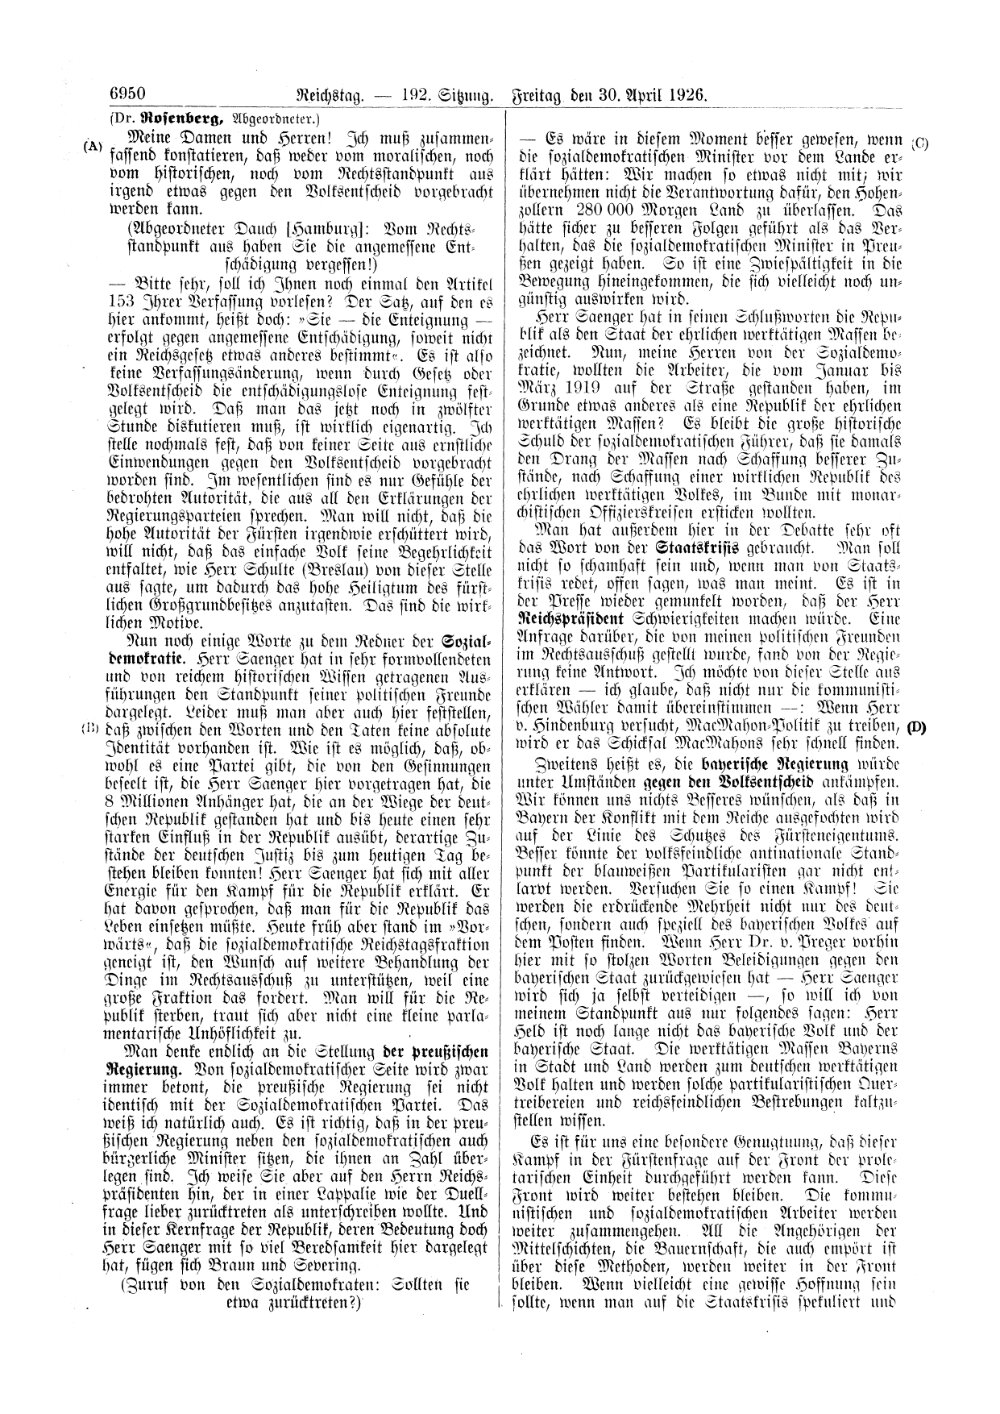 Scan of page 6950